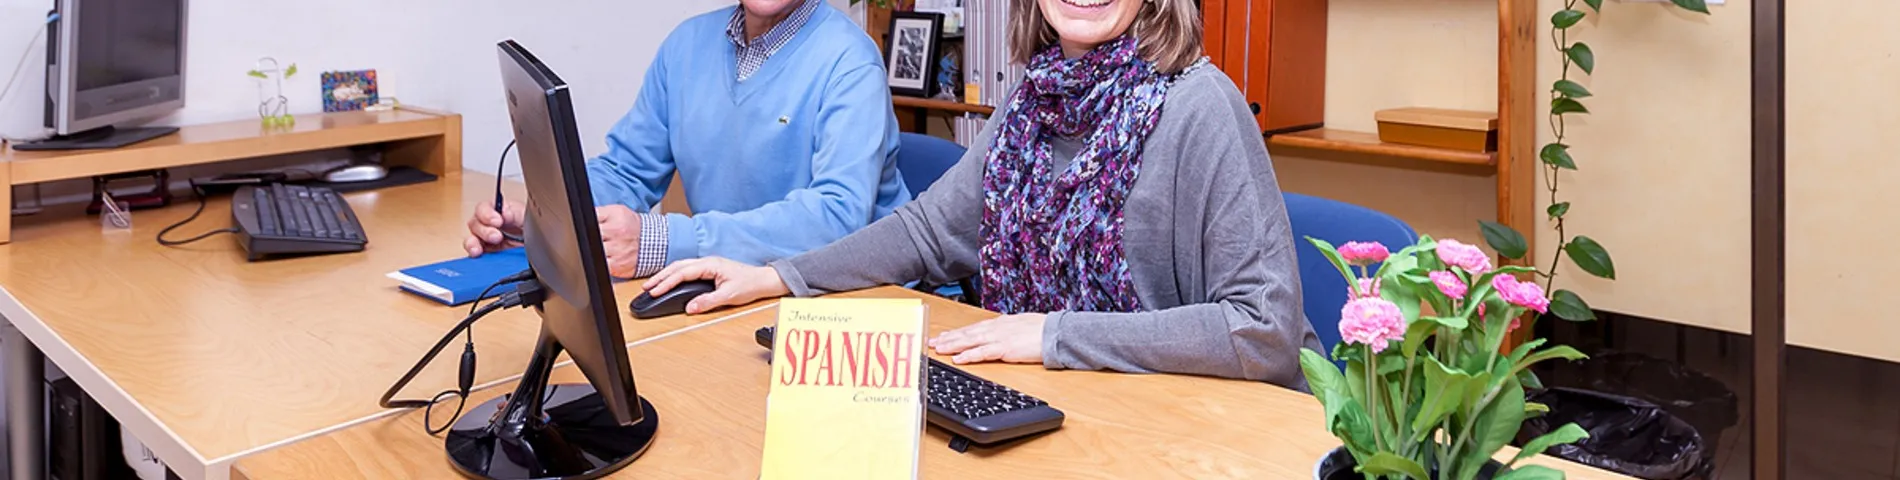 Hola Spanish Courses picture 1